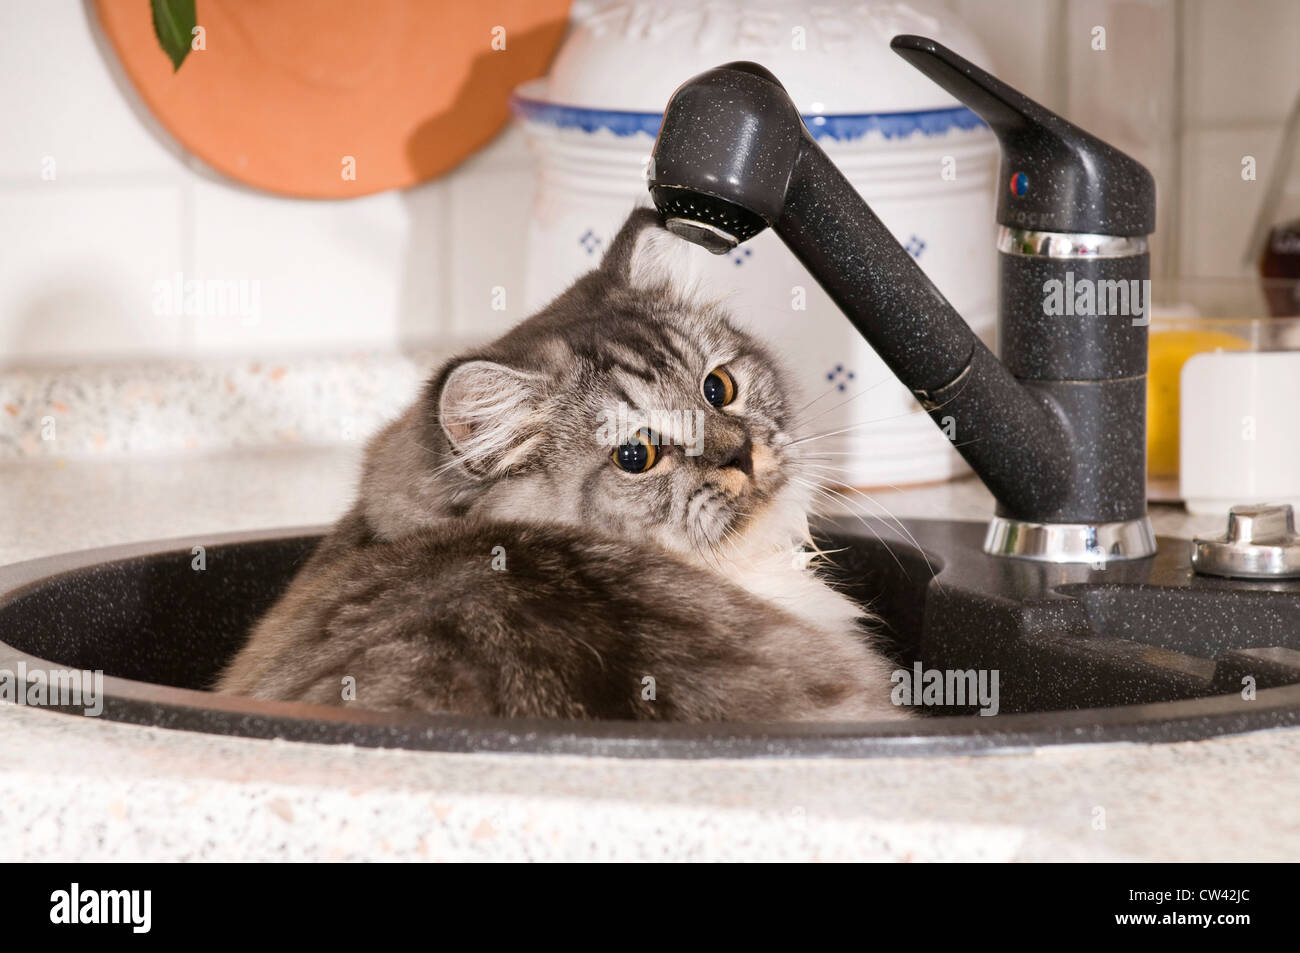 British Longhair lying in a kitchen sink Stock Photo